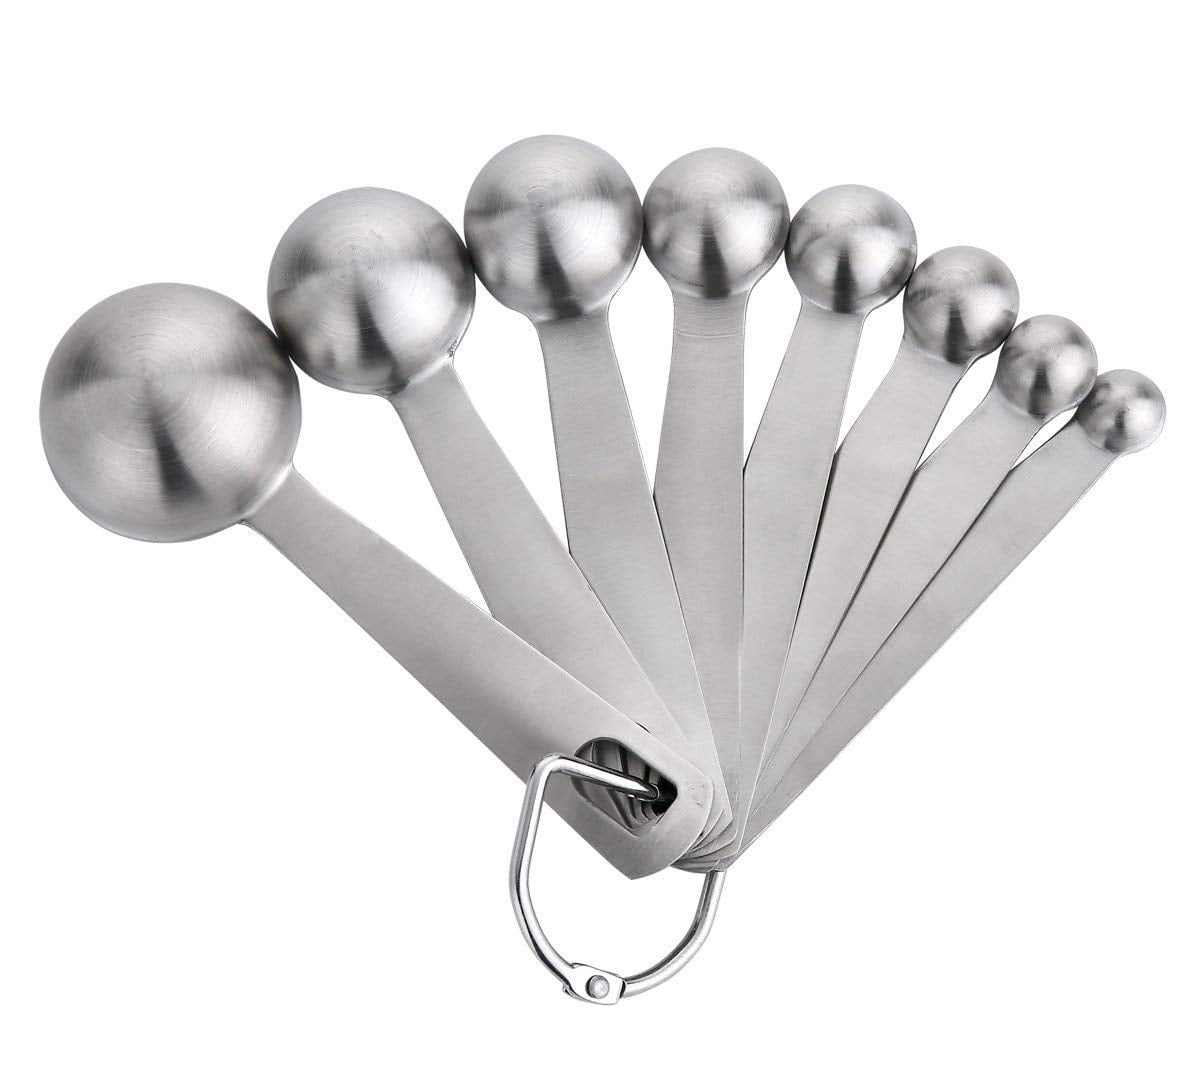 18/8 Stainless Steel Metal Measuring Spoons for Dry or Liquid,Set of 8 18 8 Stainless Steel Measuring Spoons